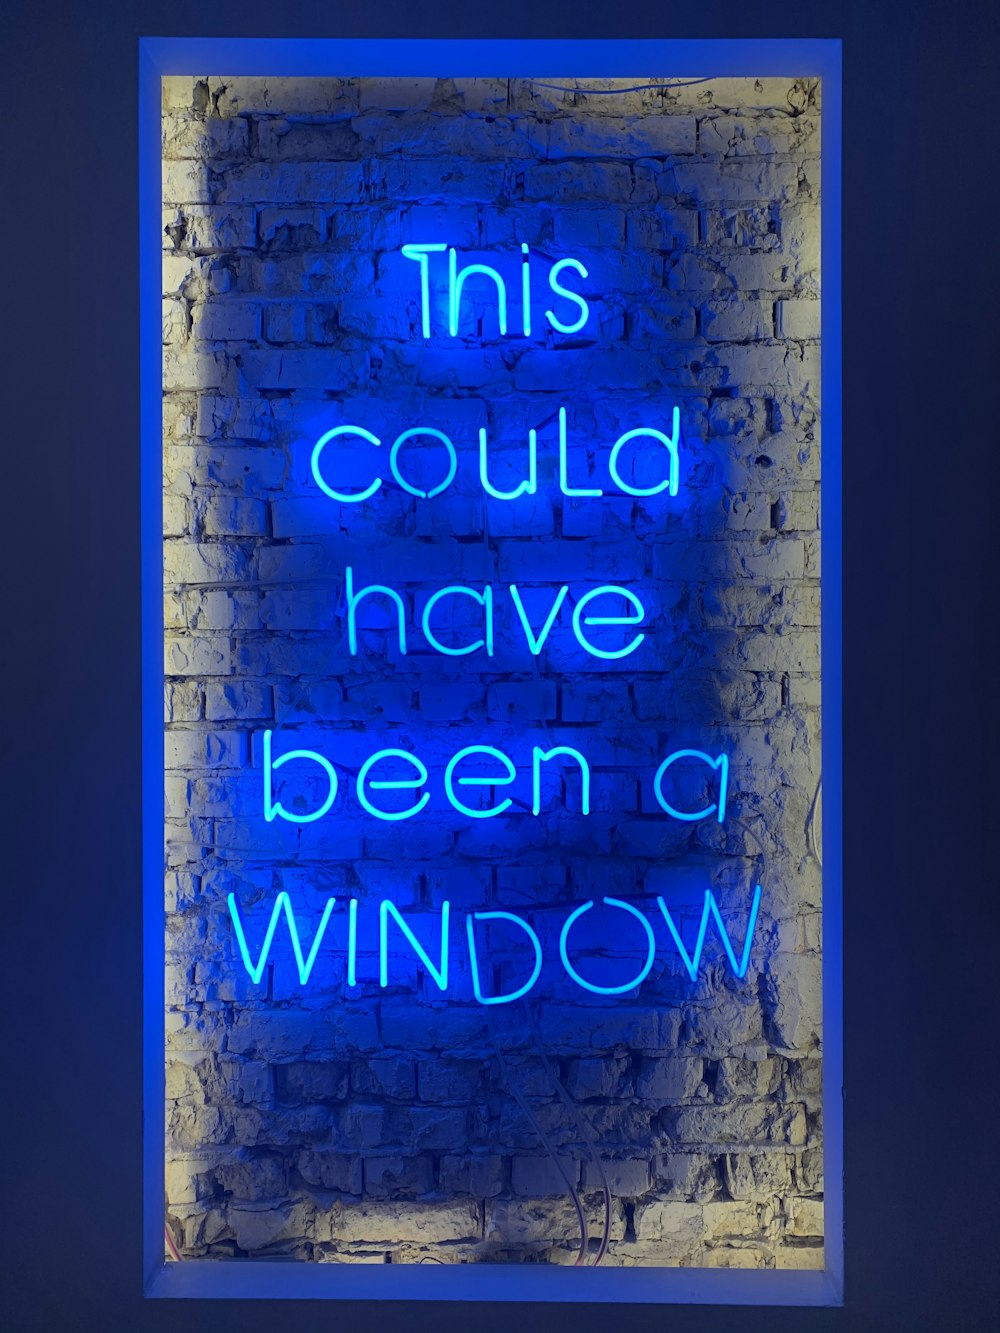 This could have been a Window LED signage